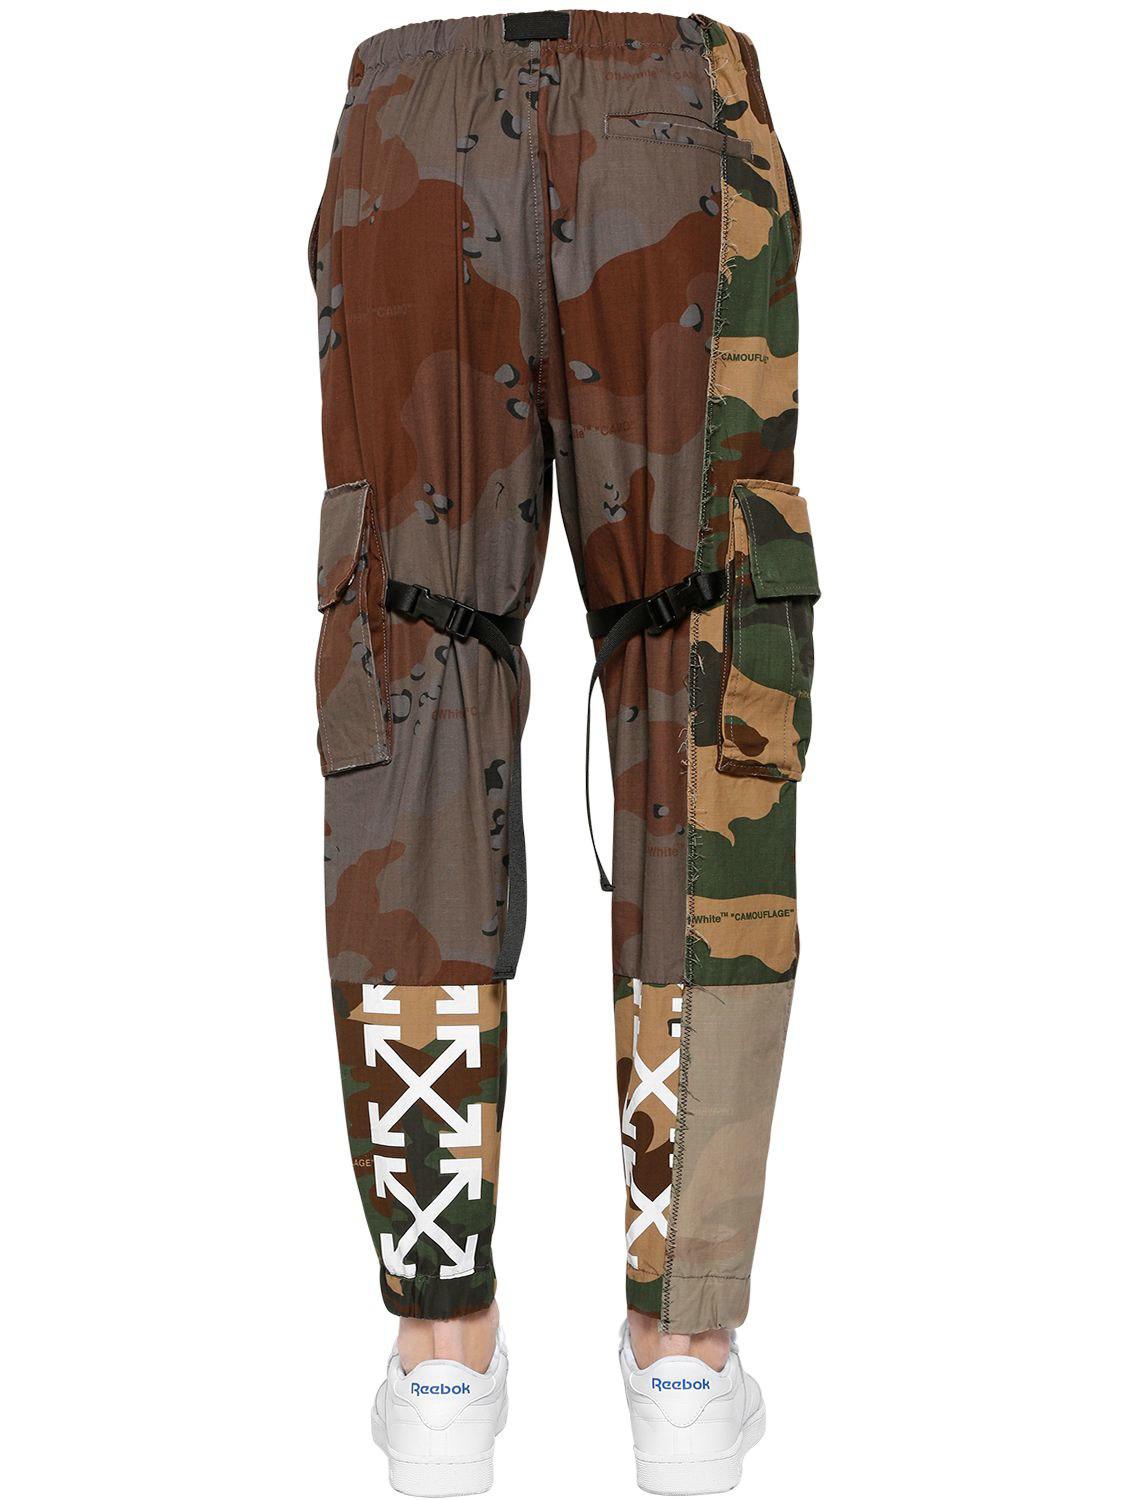 Off-White c/o Virgil Abloh Reconstructed Camo Cotton Cargo Pants in Brown  for Men - Lyst